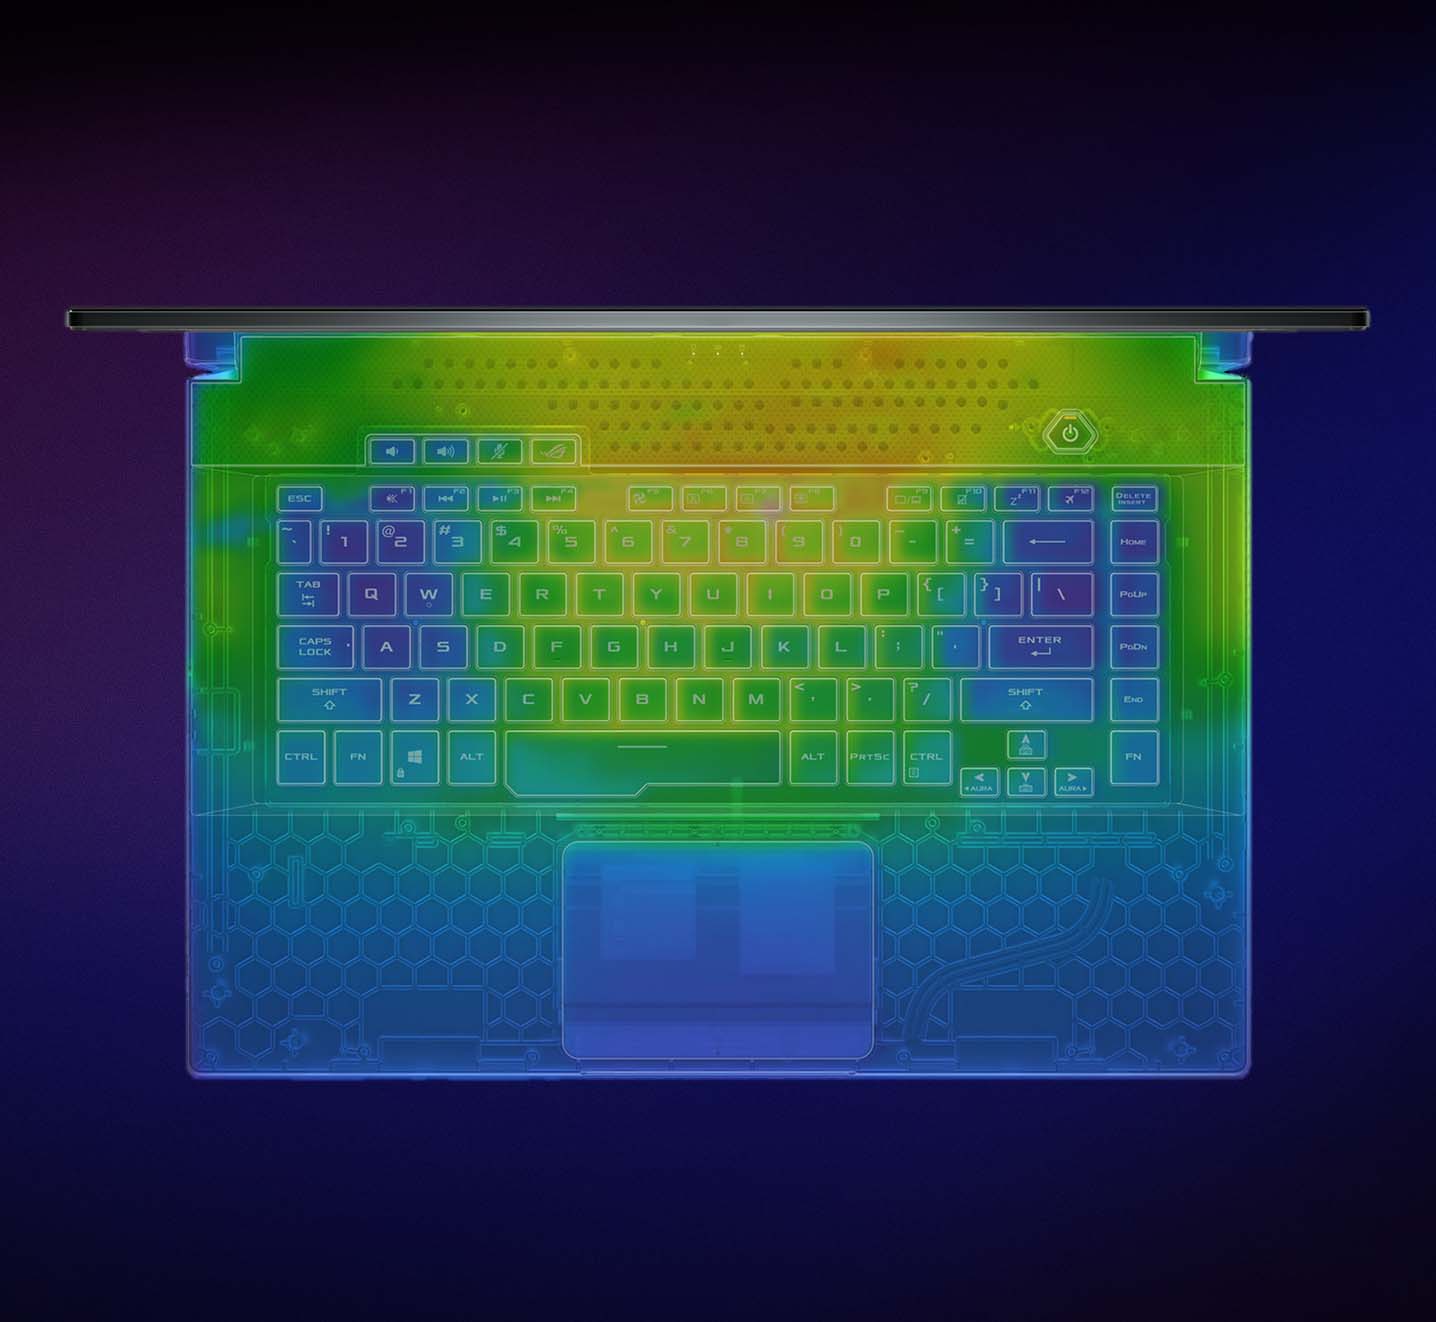 Thermal imaging of the Strix G17 keyboard.